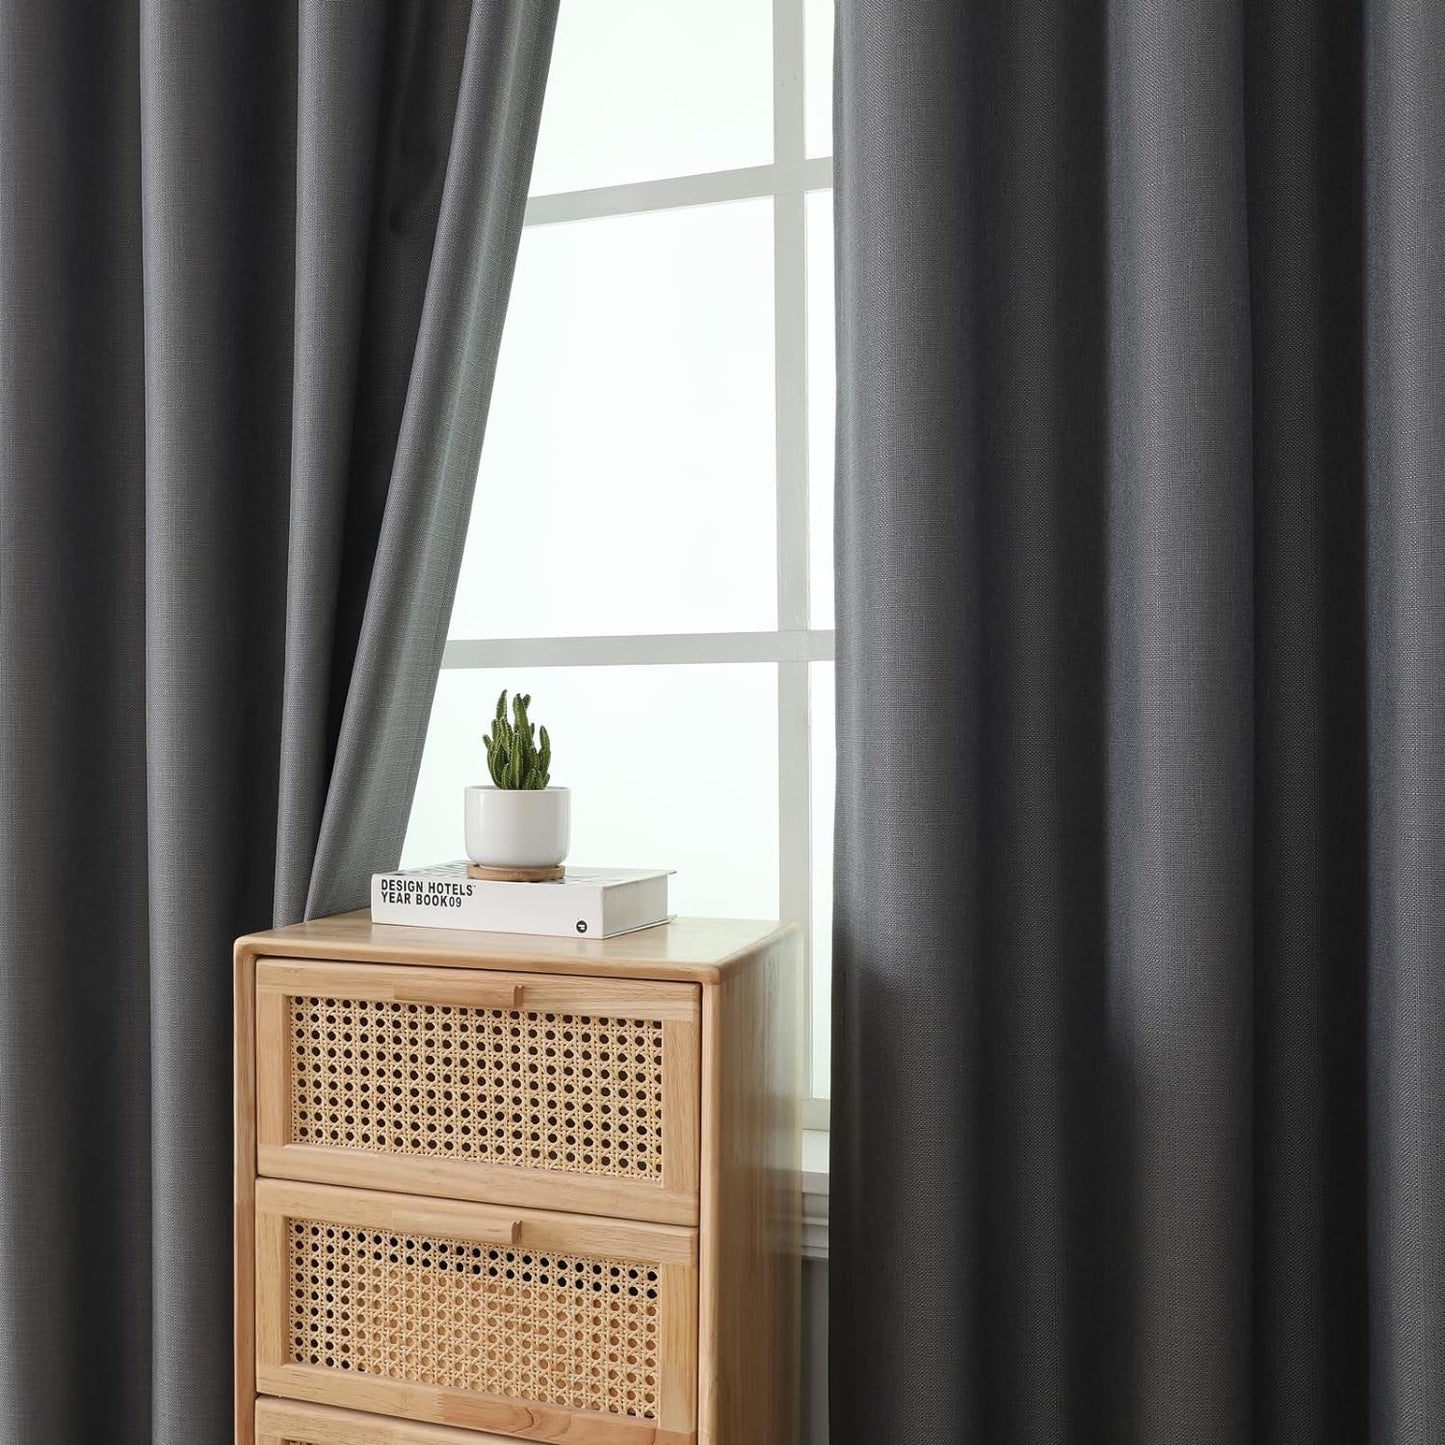 Blackout Curtains for Complete Darkness Room Darkening Thermal Insulated Window Curtain Panels with Noise Canceling Double Layer Liner for Bedroom (52 X 84 Inch, 2 Panels, Dark Gray)  Airwill   